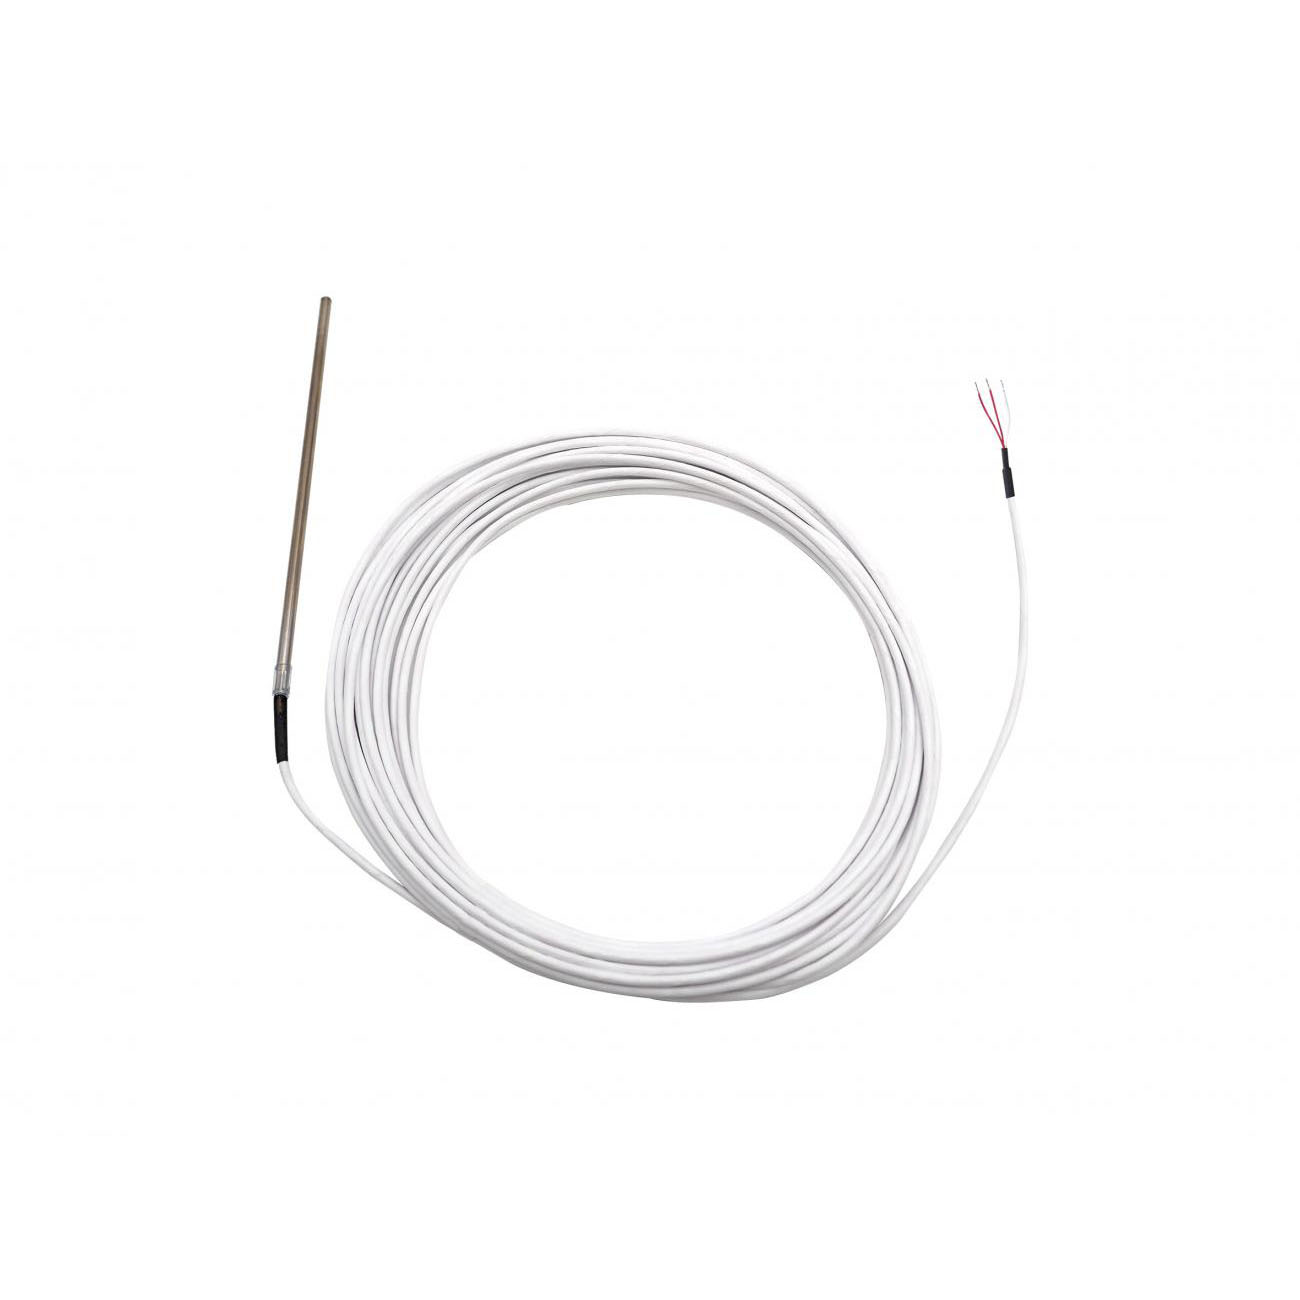 SF 50 Cable temperature probe with resistive element